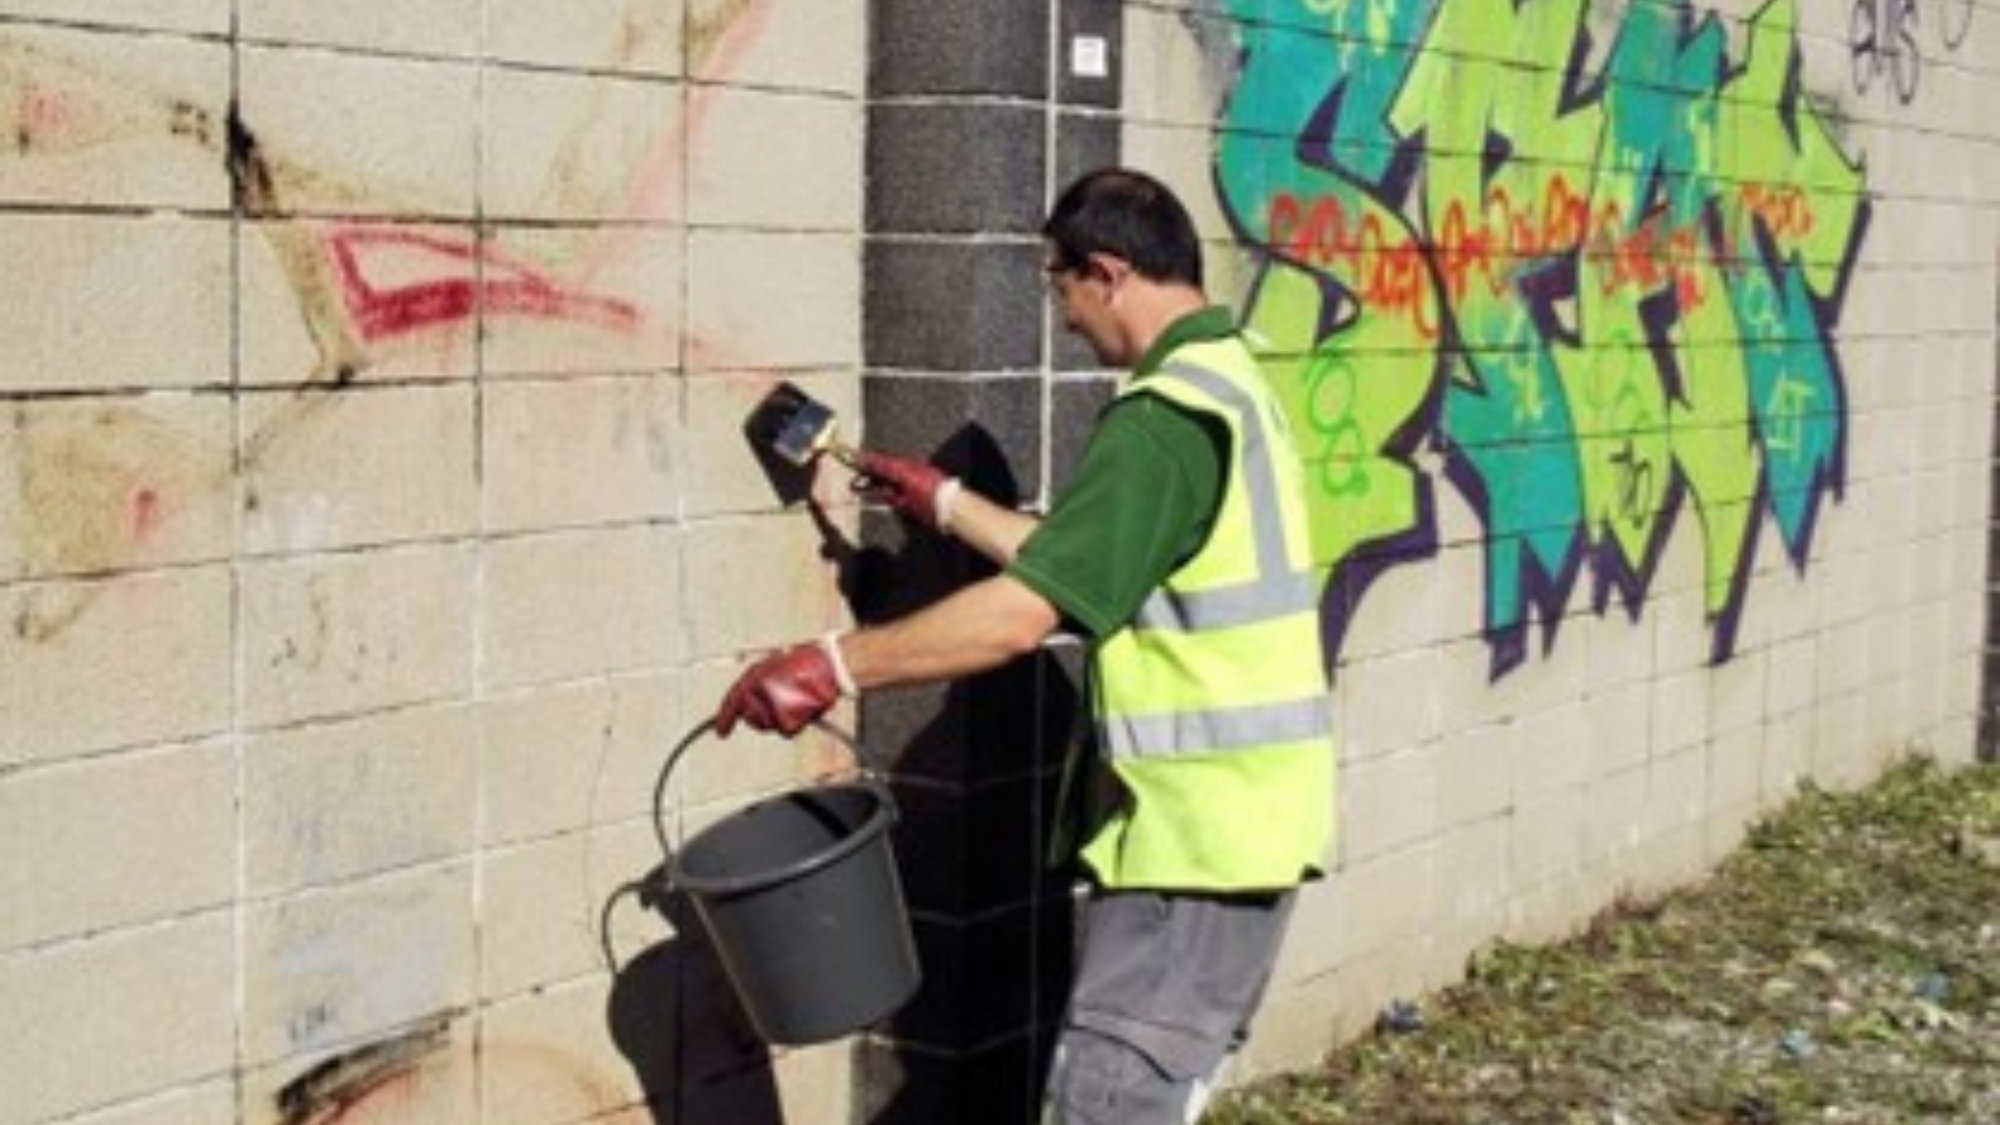 Graffiti: Street Art or Vandalism? How to Assess it and How to Respond